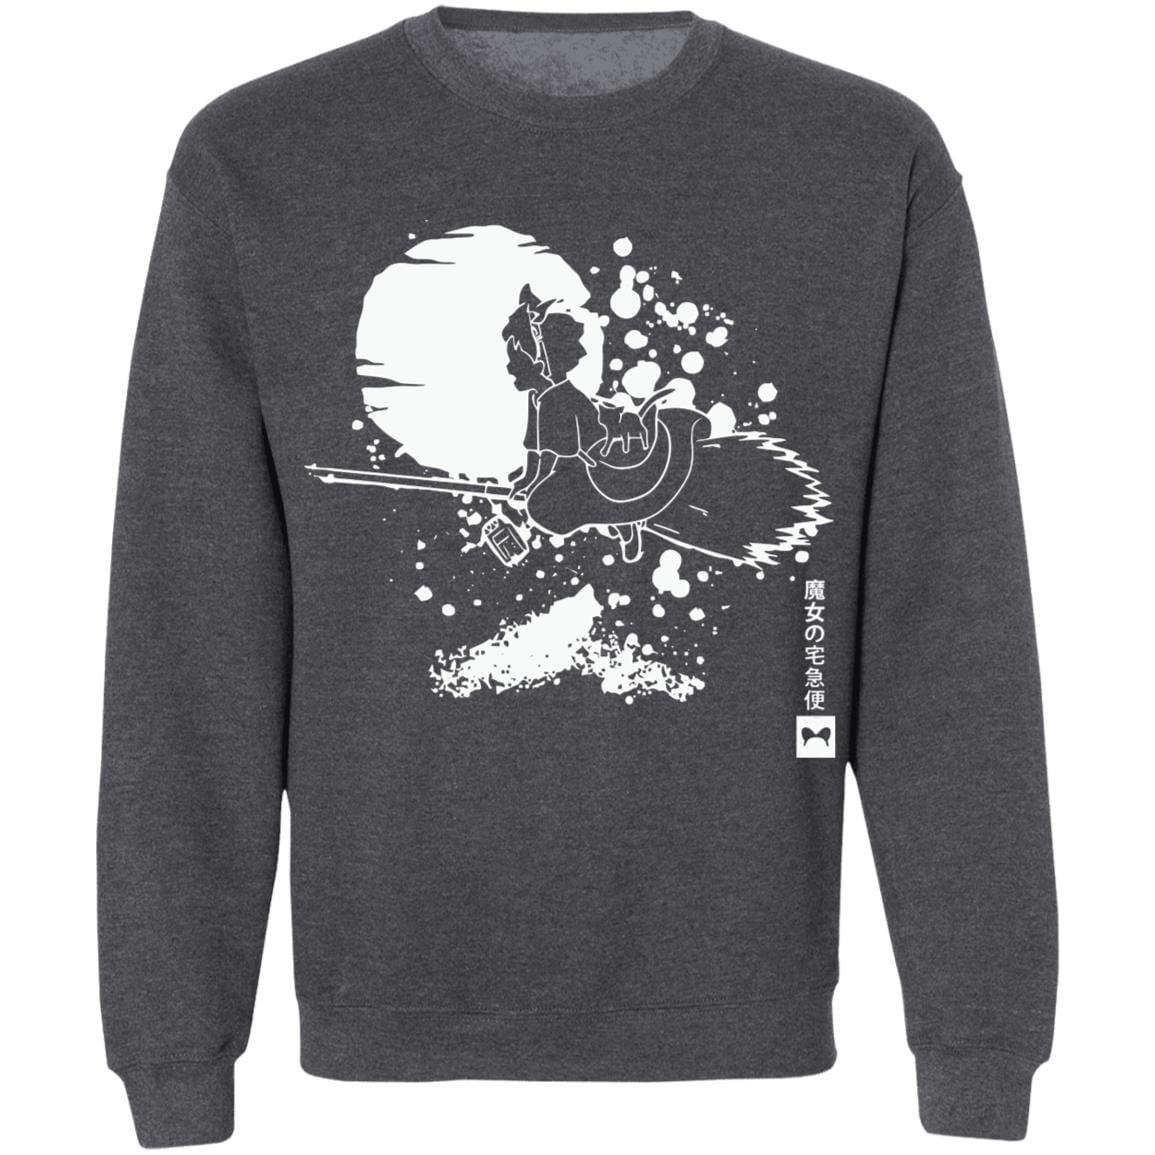 Kiki’s Delivery Service – Flying in the night Sweatshirt Unisex